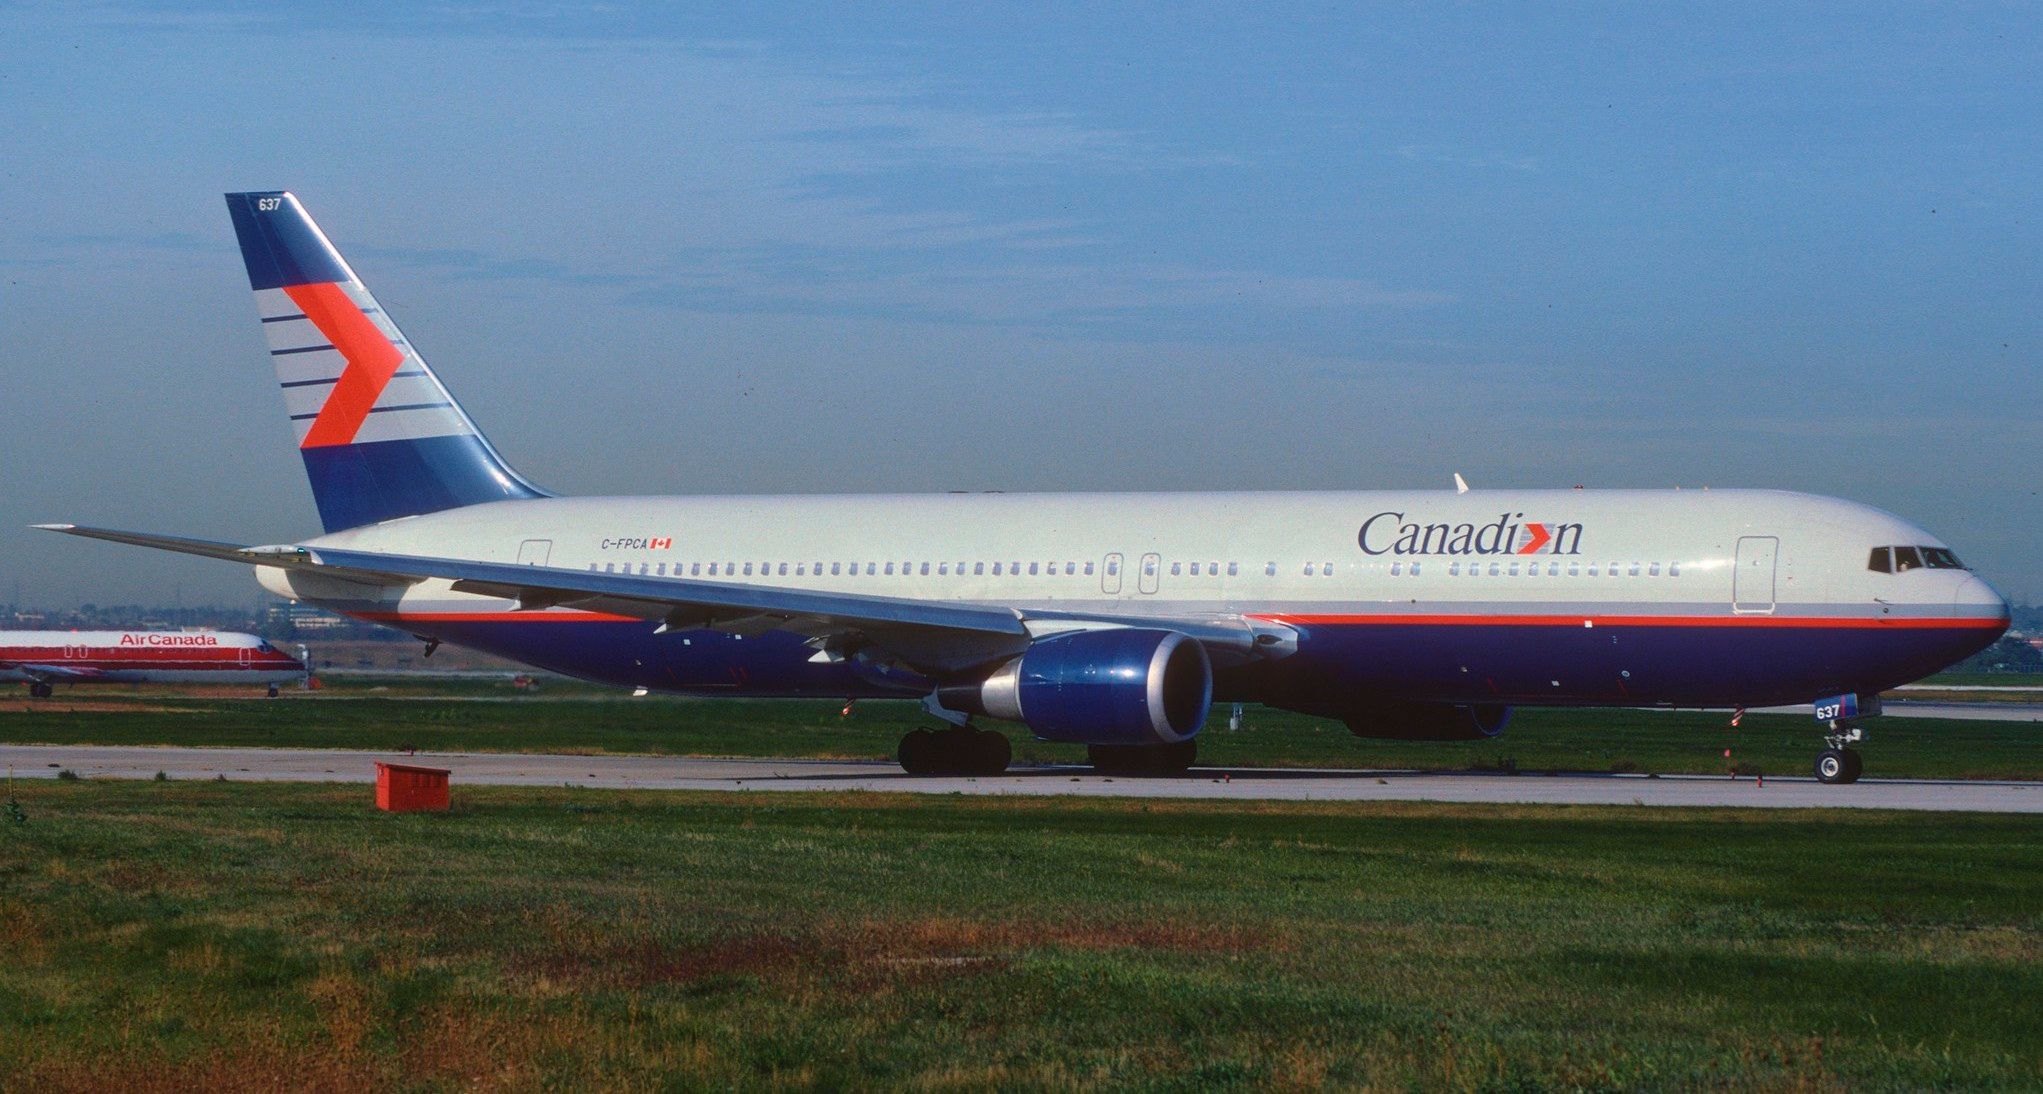 Canadian Airlines Boeing 767-300